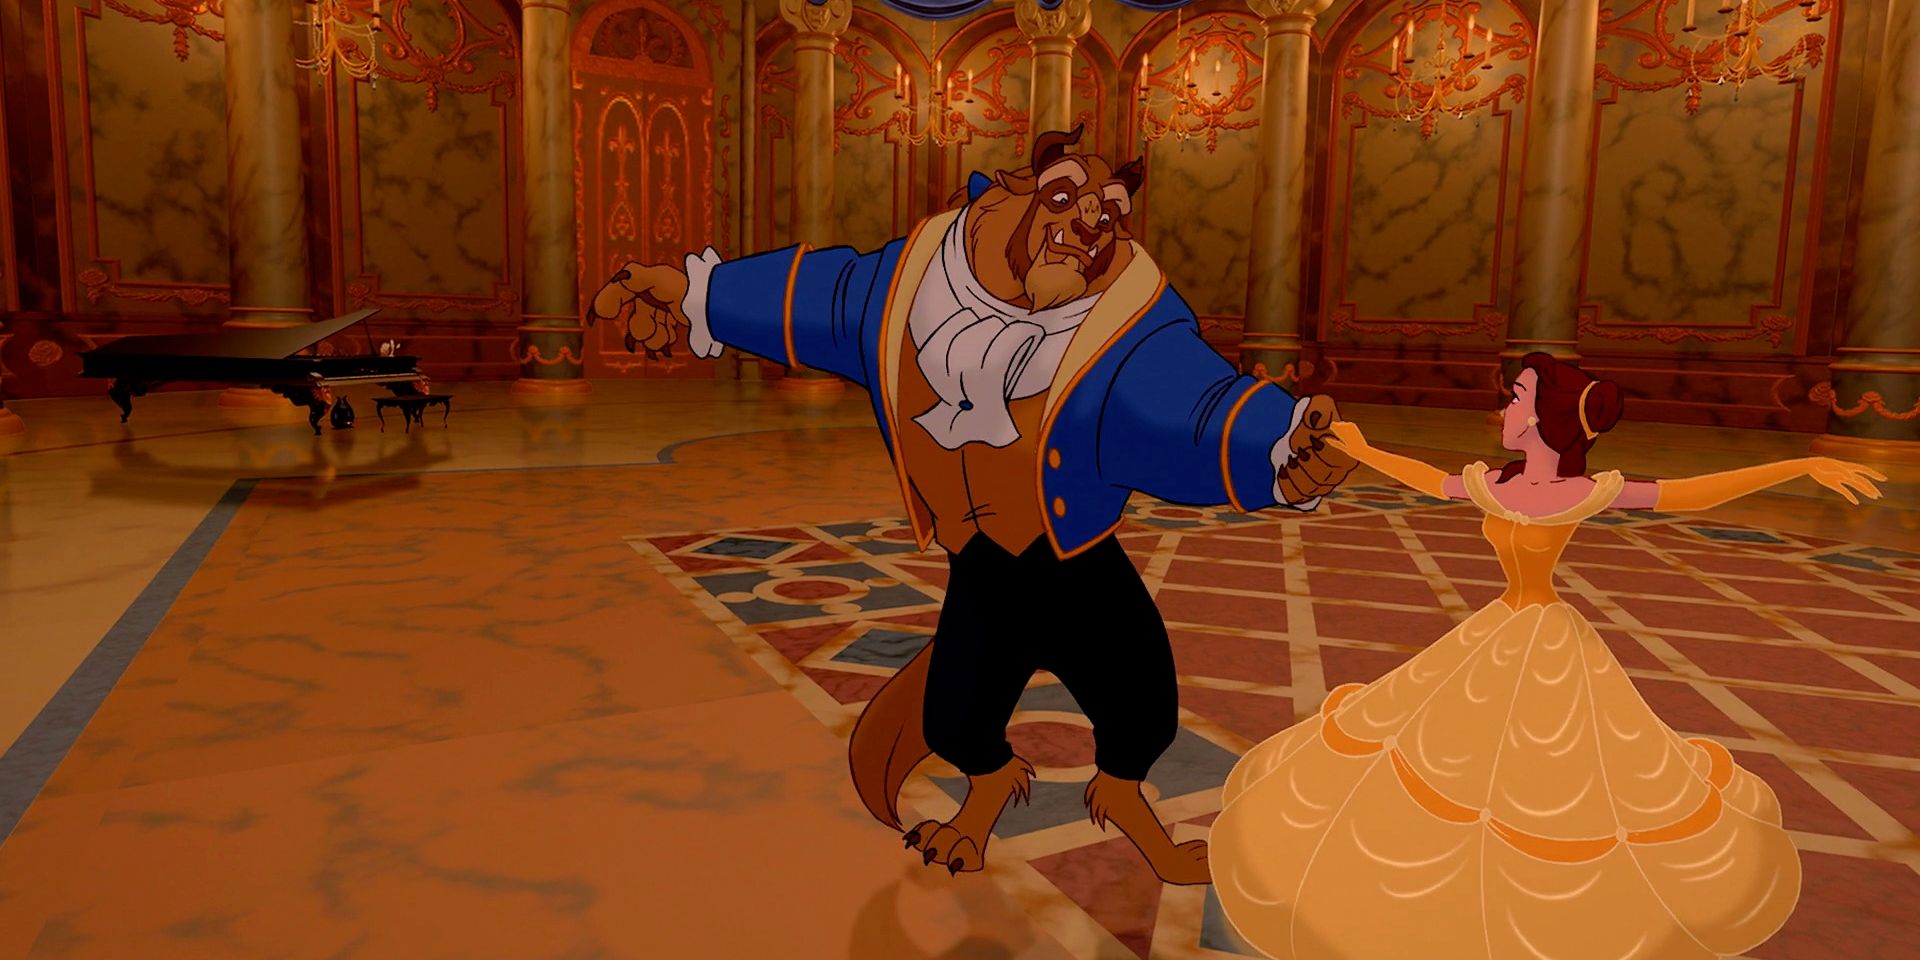 7 things you didn't now about Disney's 'Beauty and the Beast